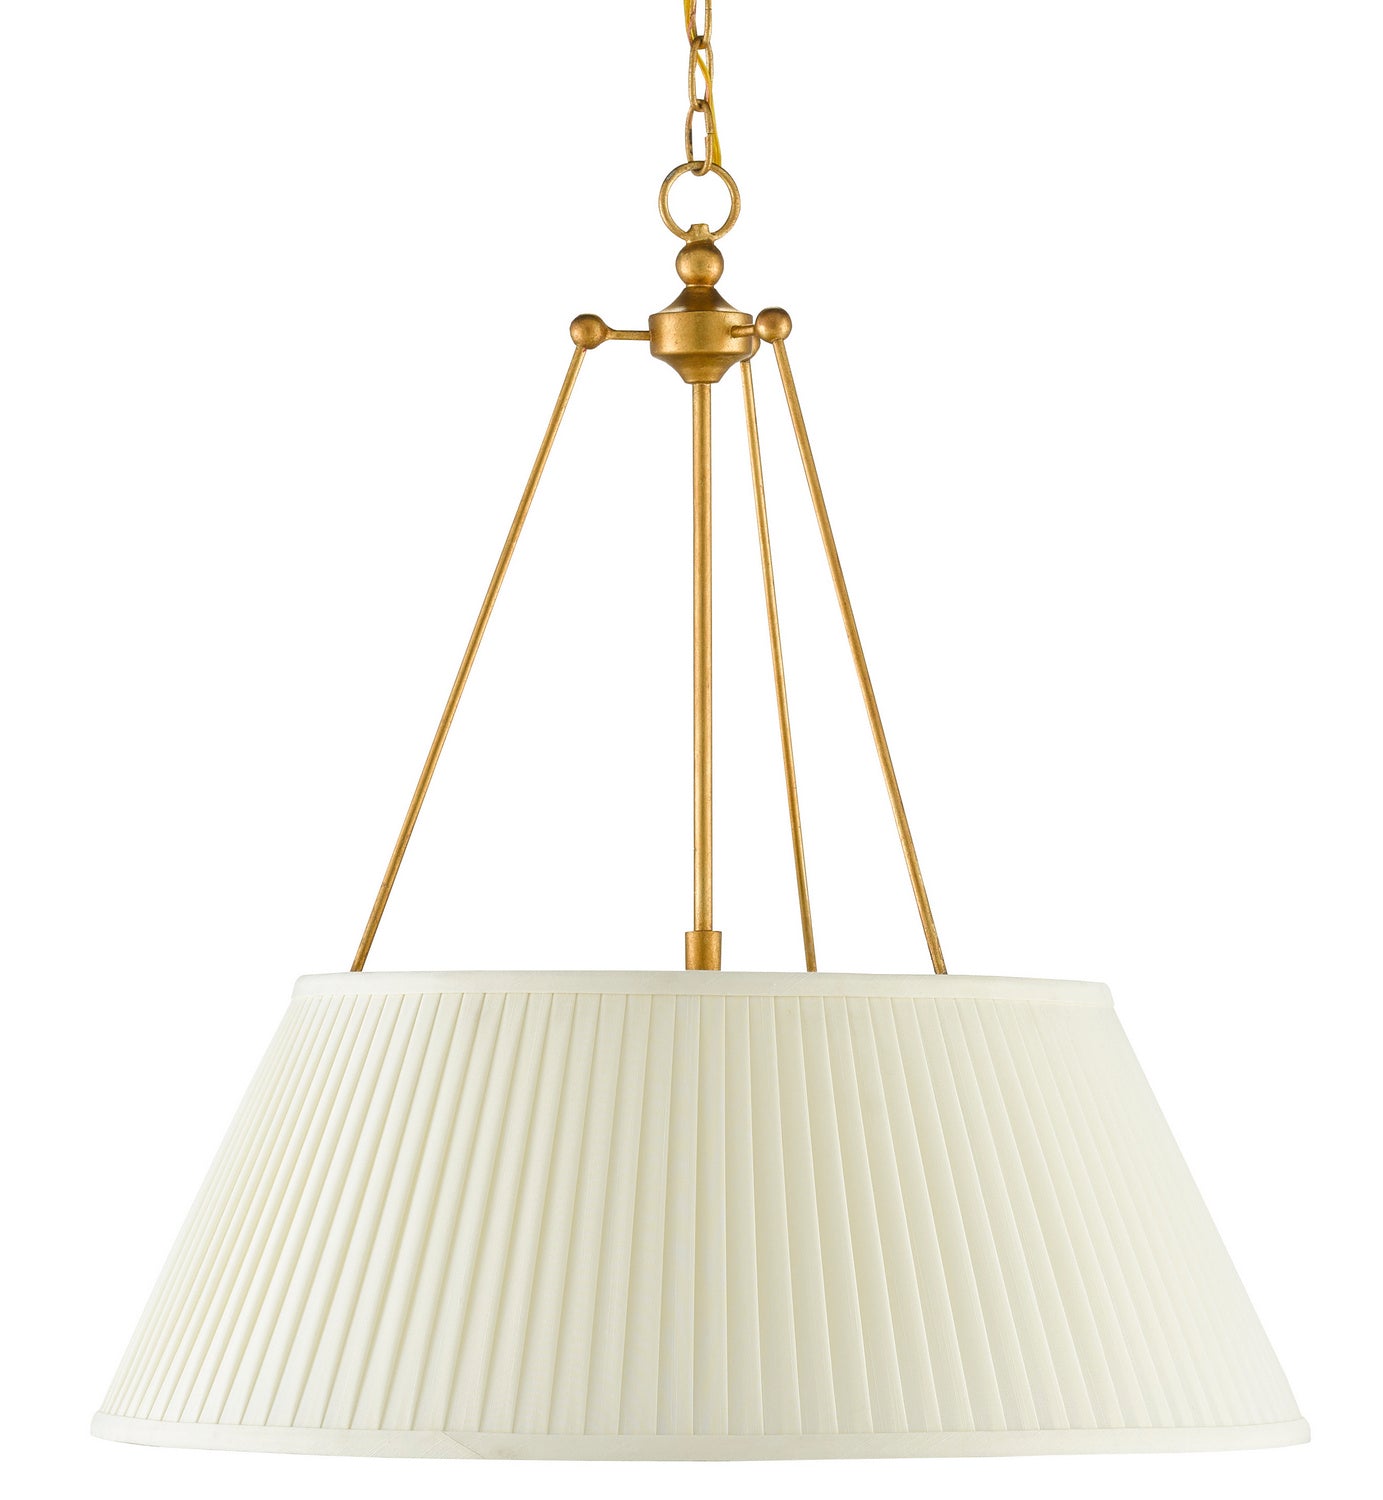 LED Pendant from the Lytham collection in Antique Gold Leaf/White finish